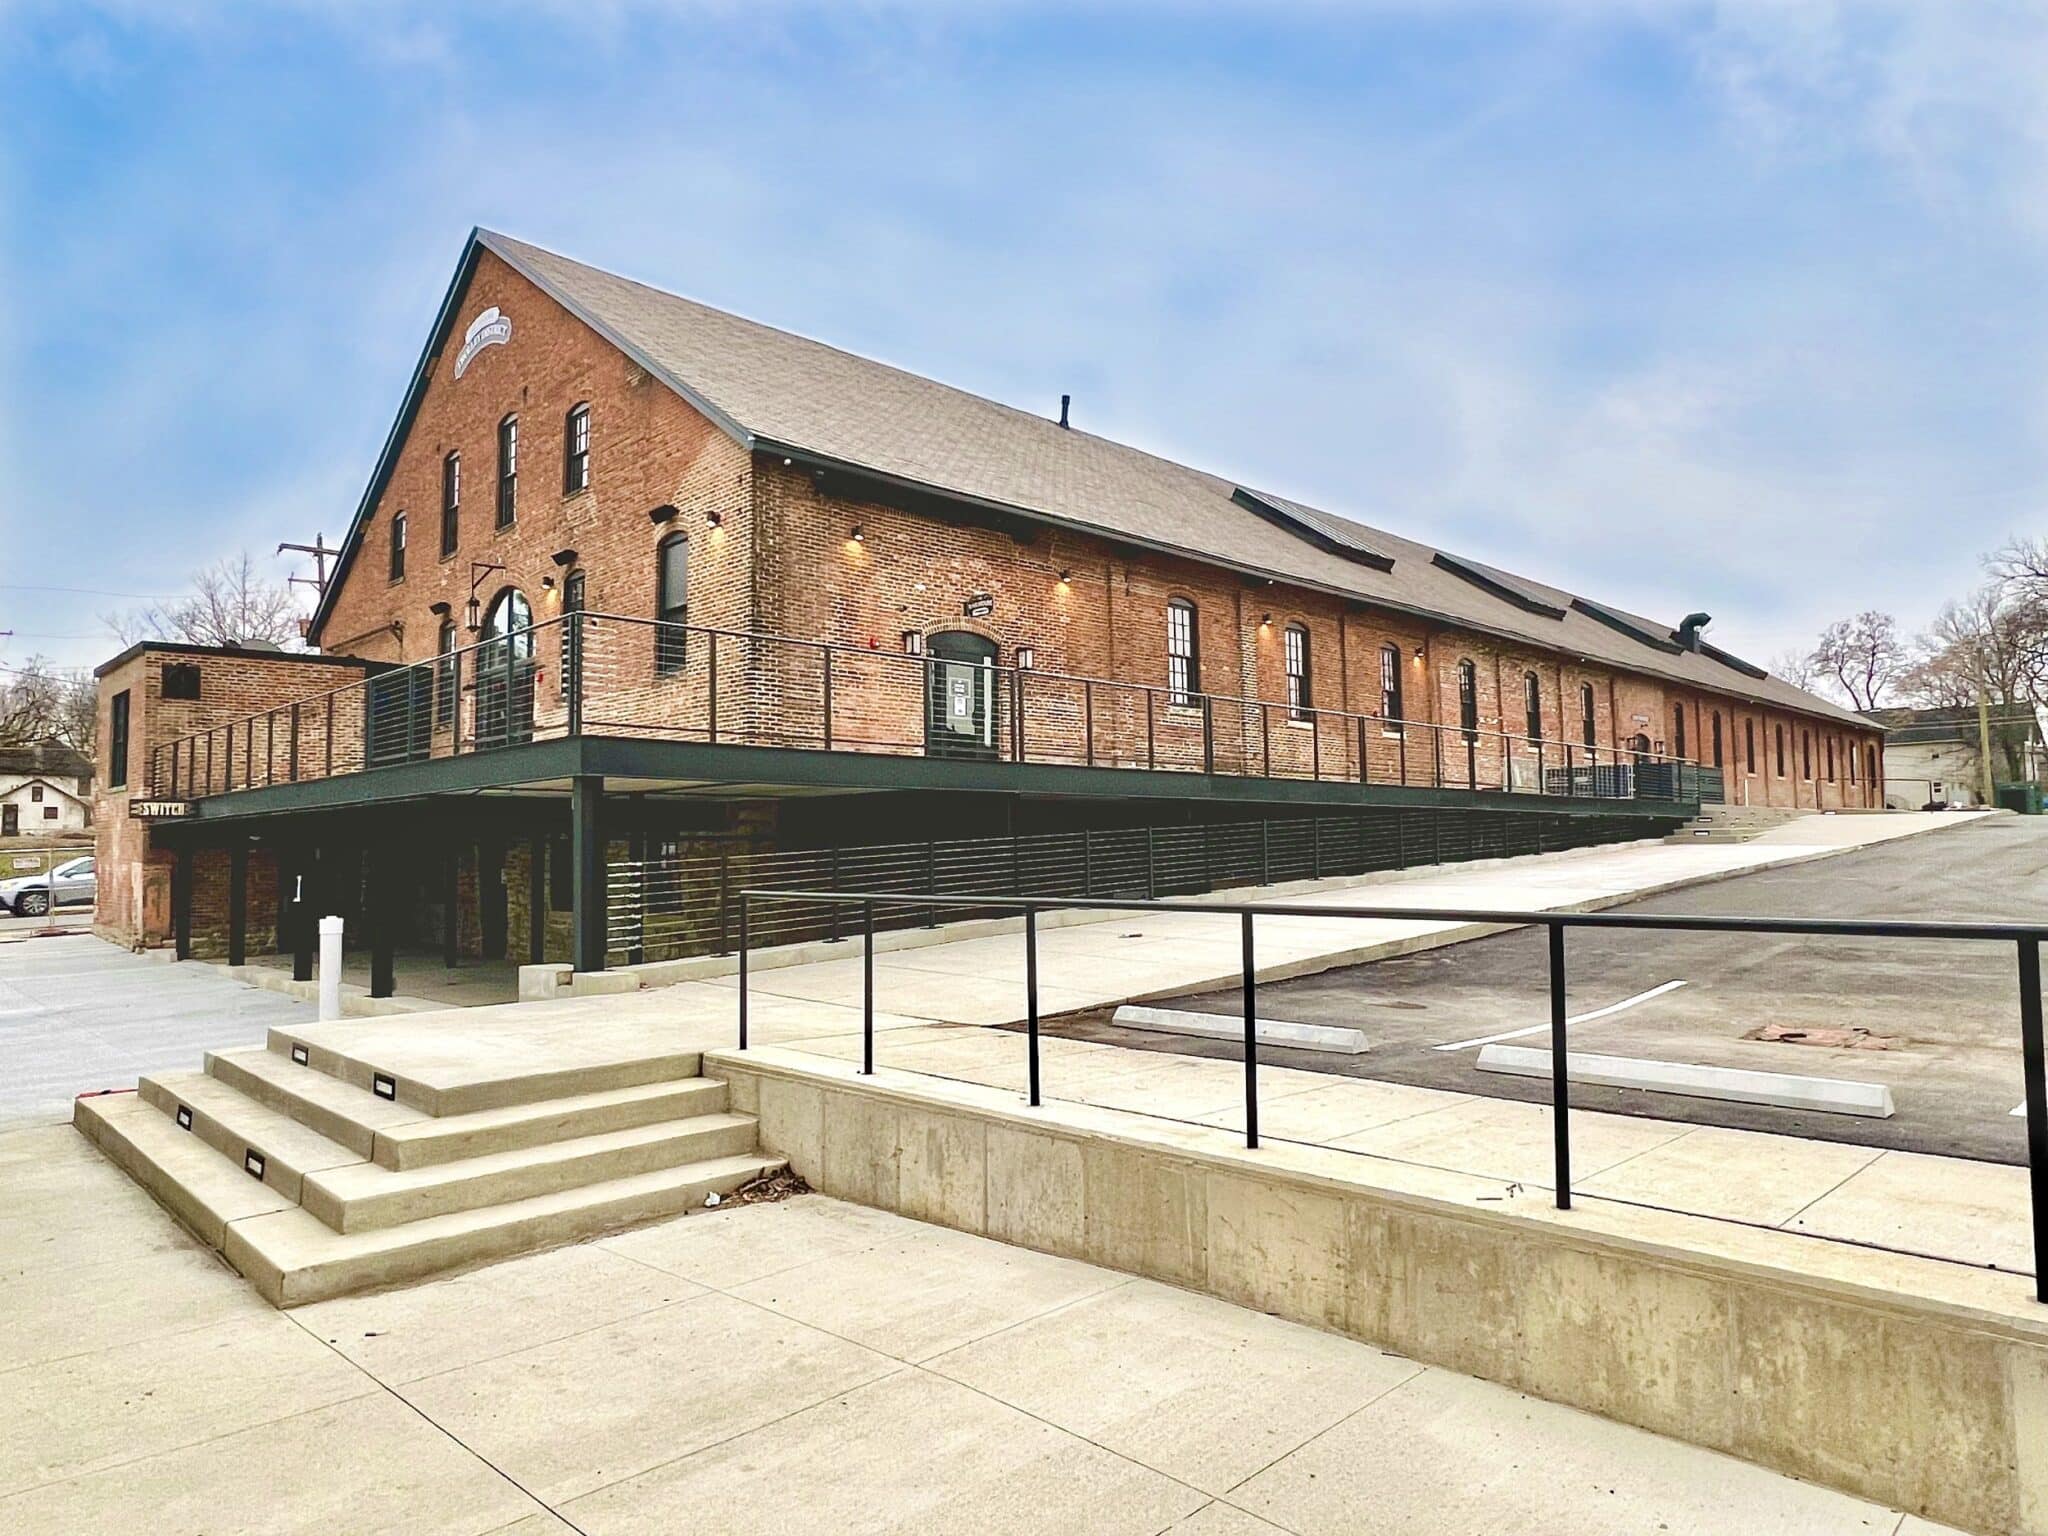 Exterior photo of the Historic Trolley Barn in Columbus, Ohio, which has been renovated and made into the East Market. A two-story brick building with a metal patio on both floors.